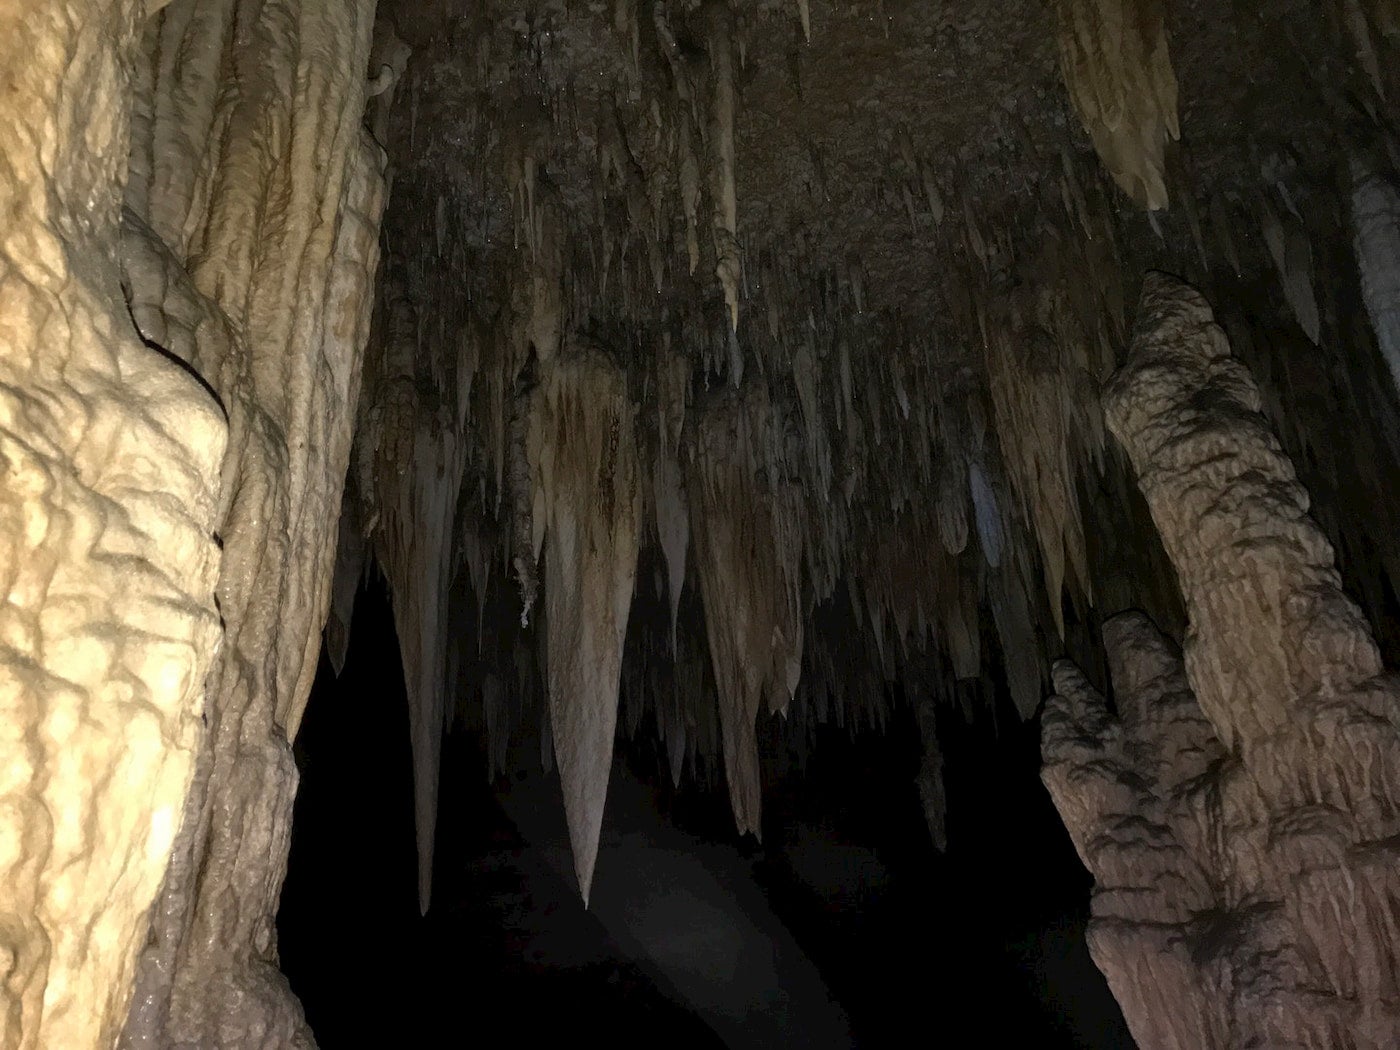 Stalactites in a dark cave.